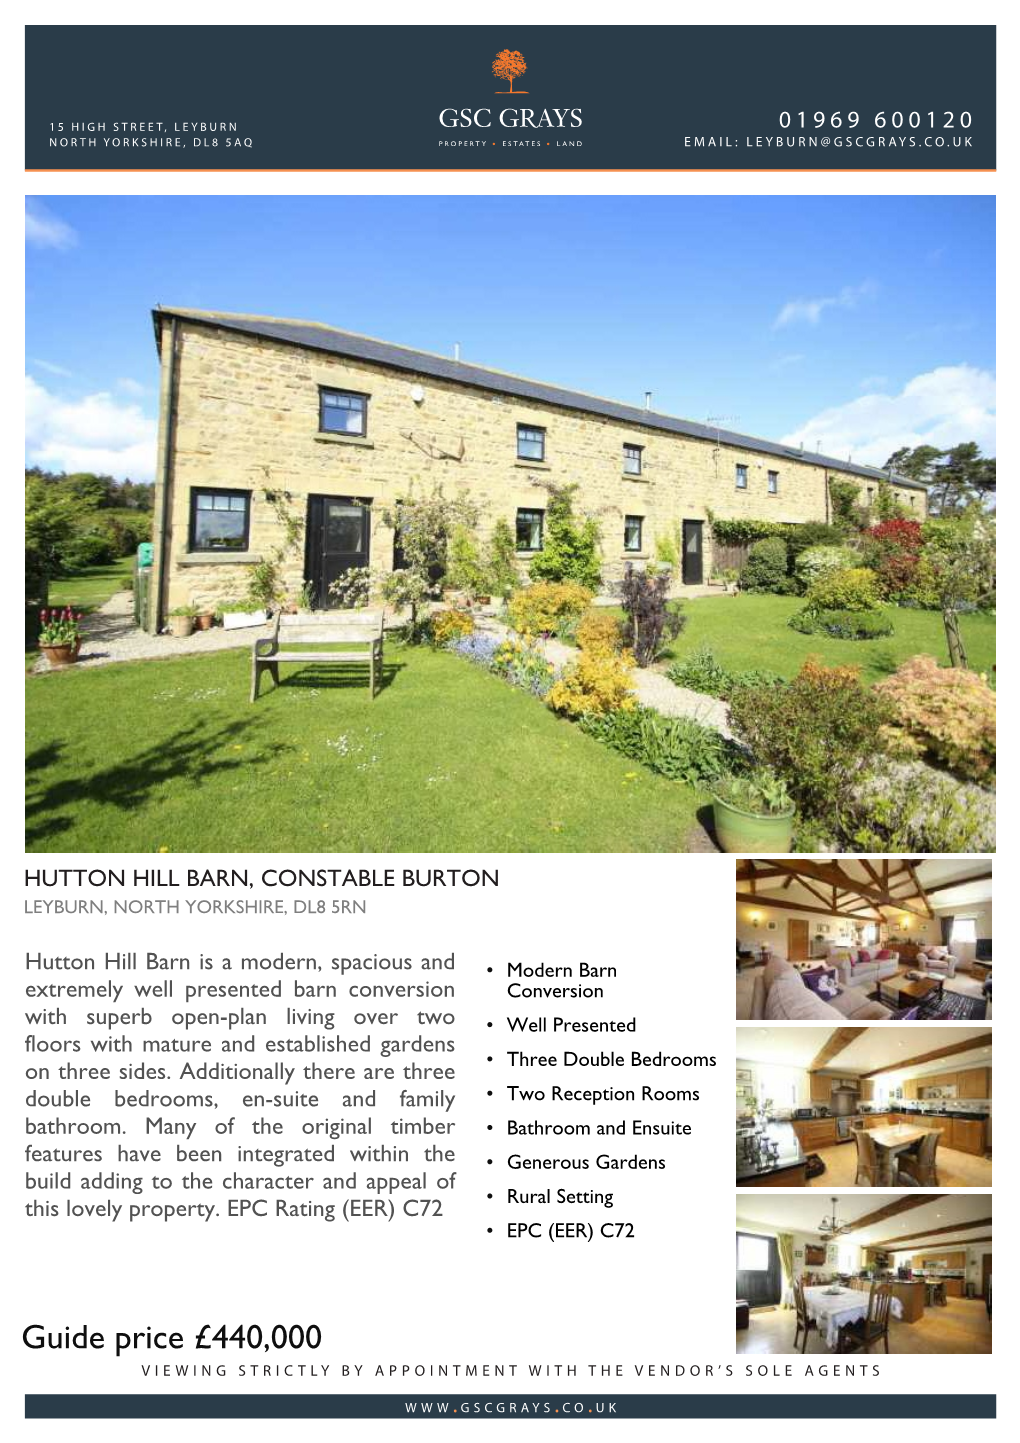 Guide Price £440,000 Viewing Strictly by Appointment with the Vendor’S Sole Agents